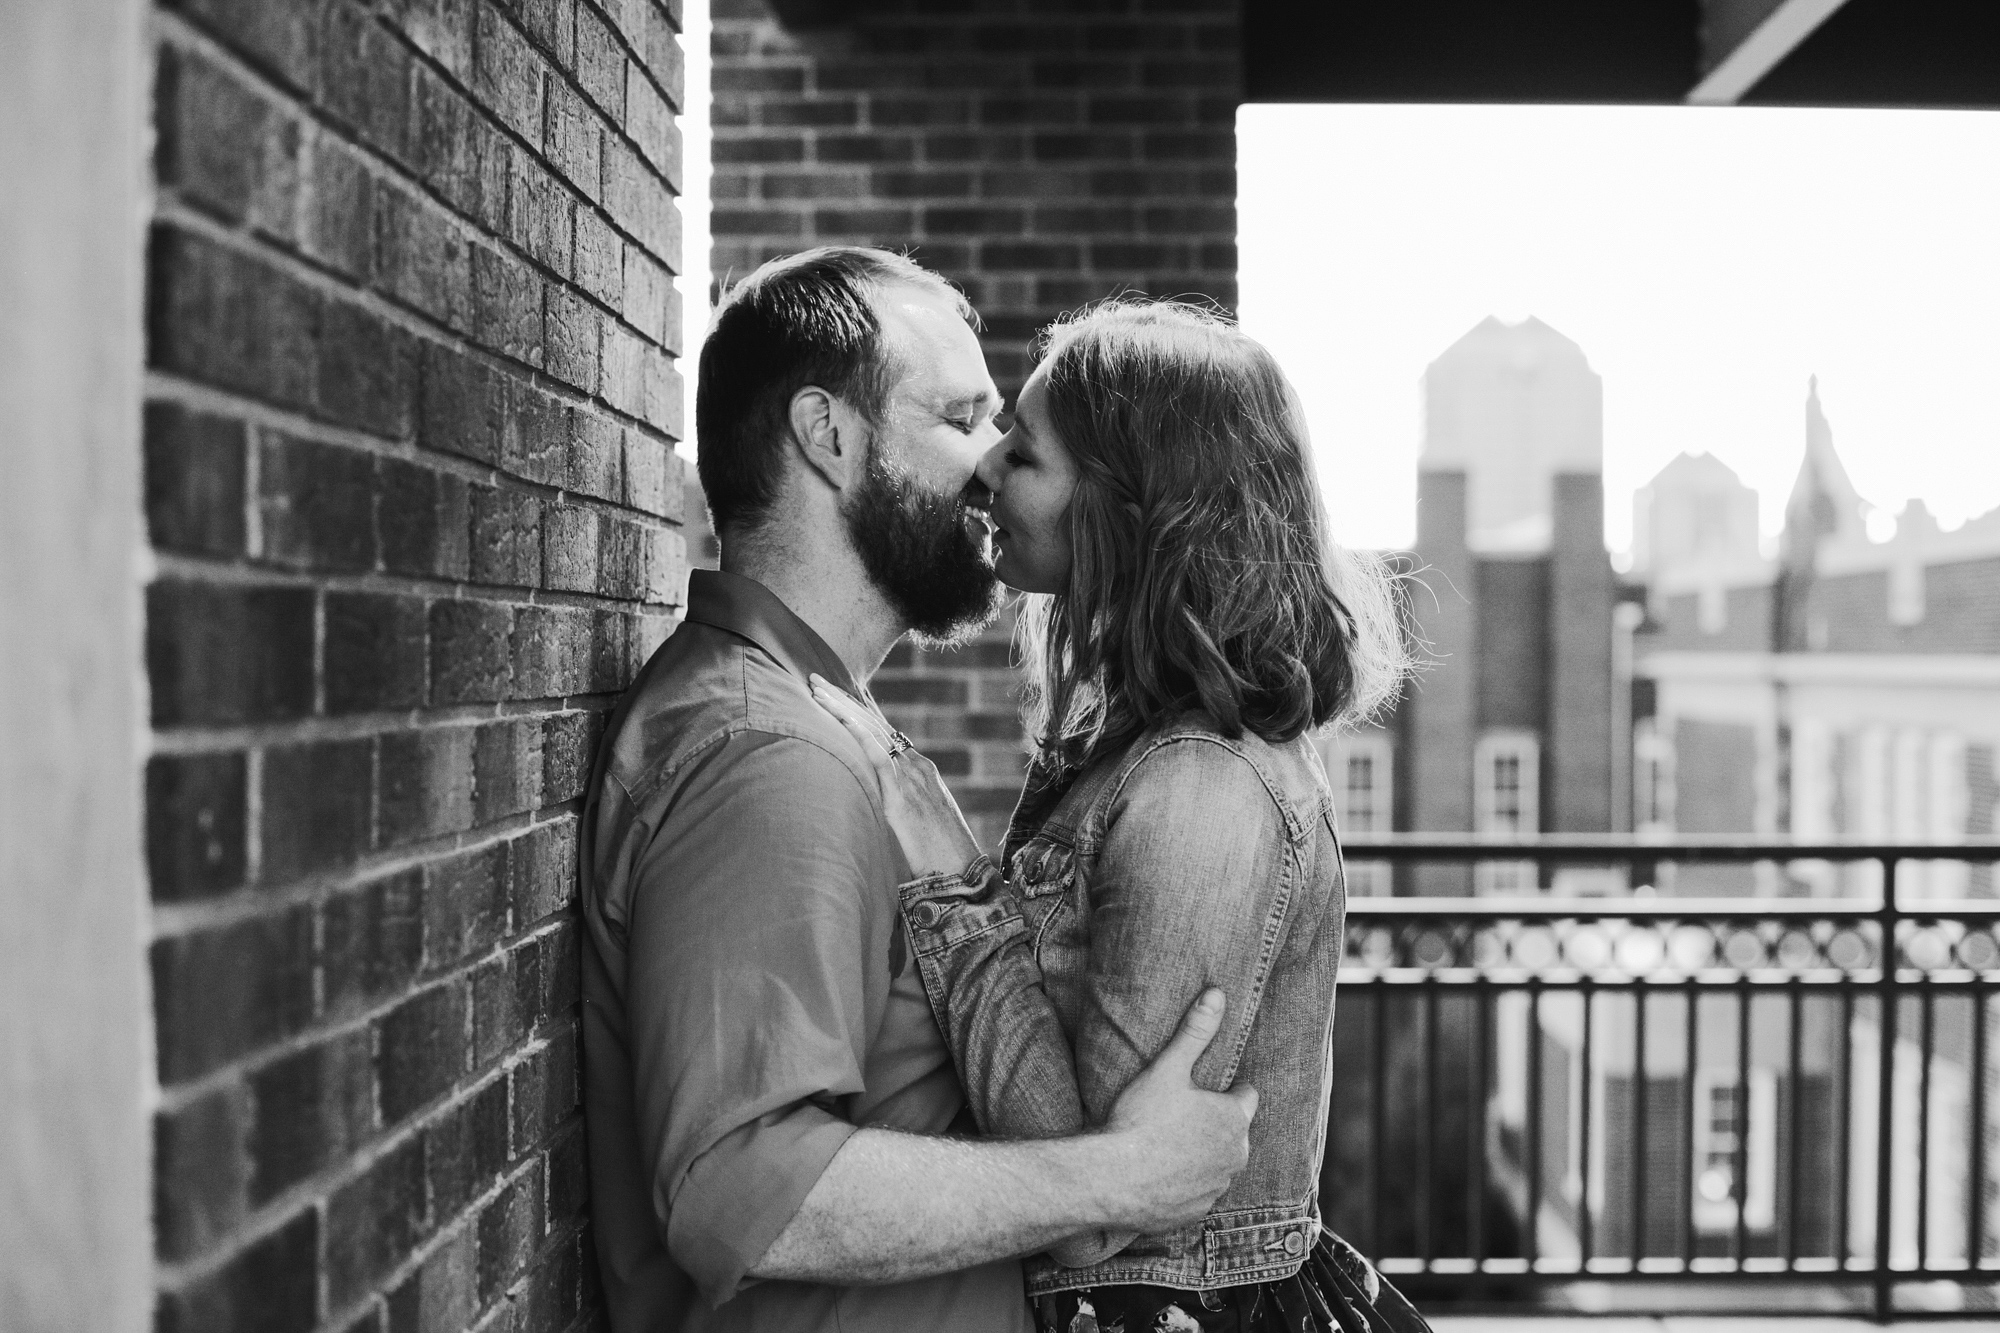 The couple by a brick wall with the city in the background. 